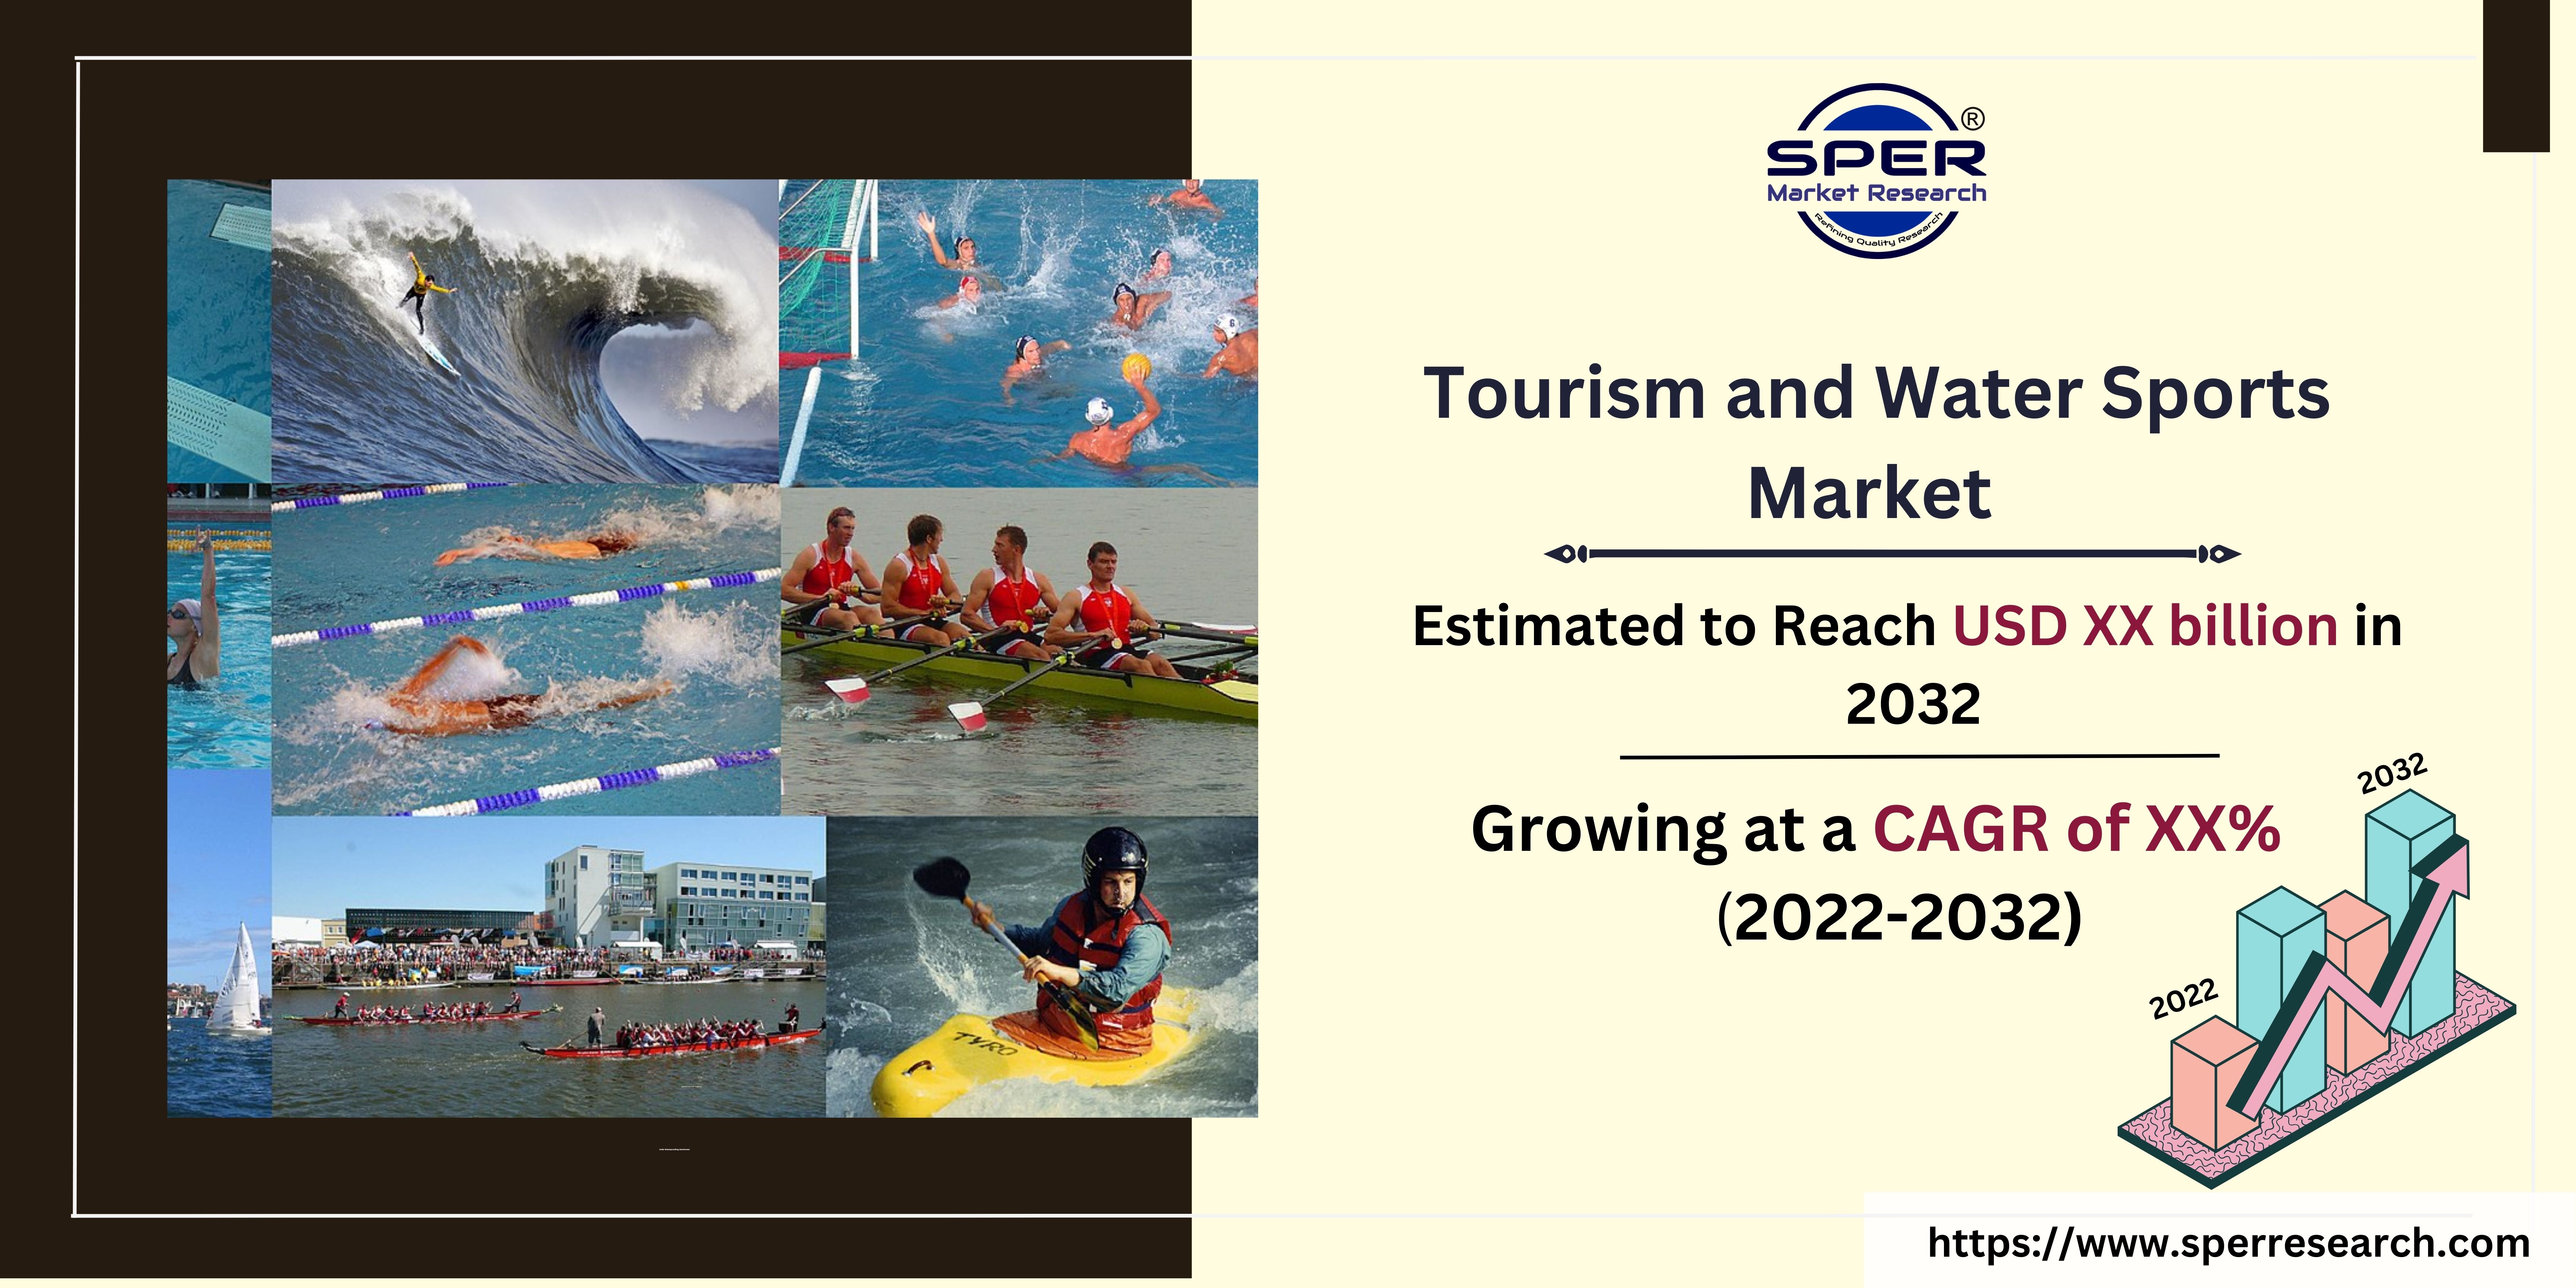 Tourism and Water Sports Market